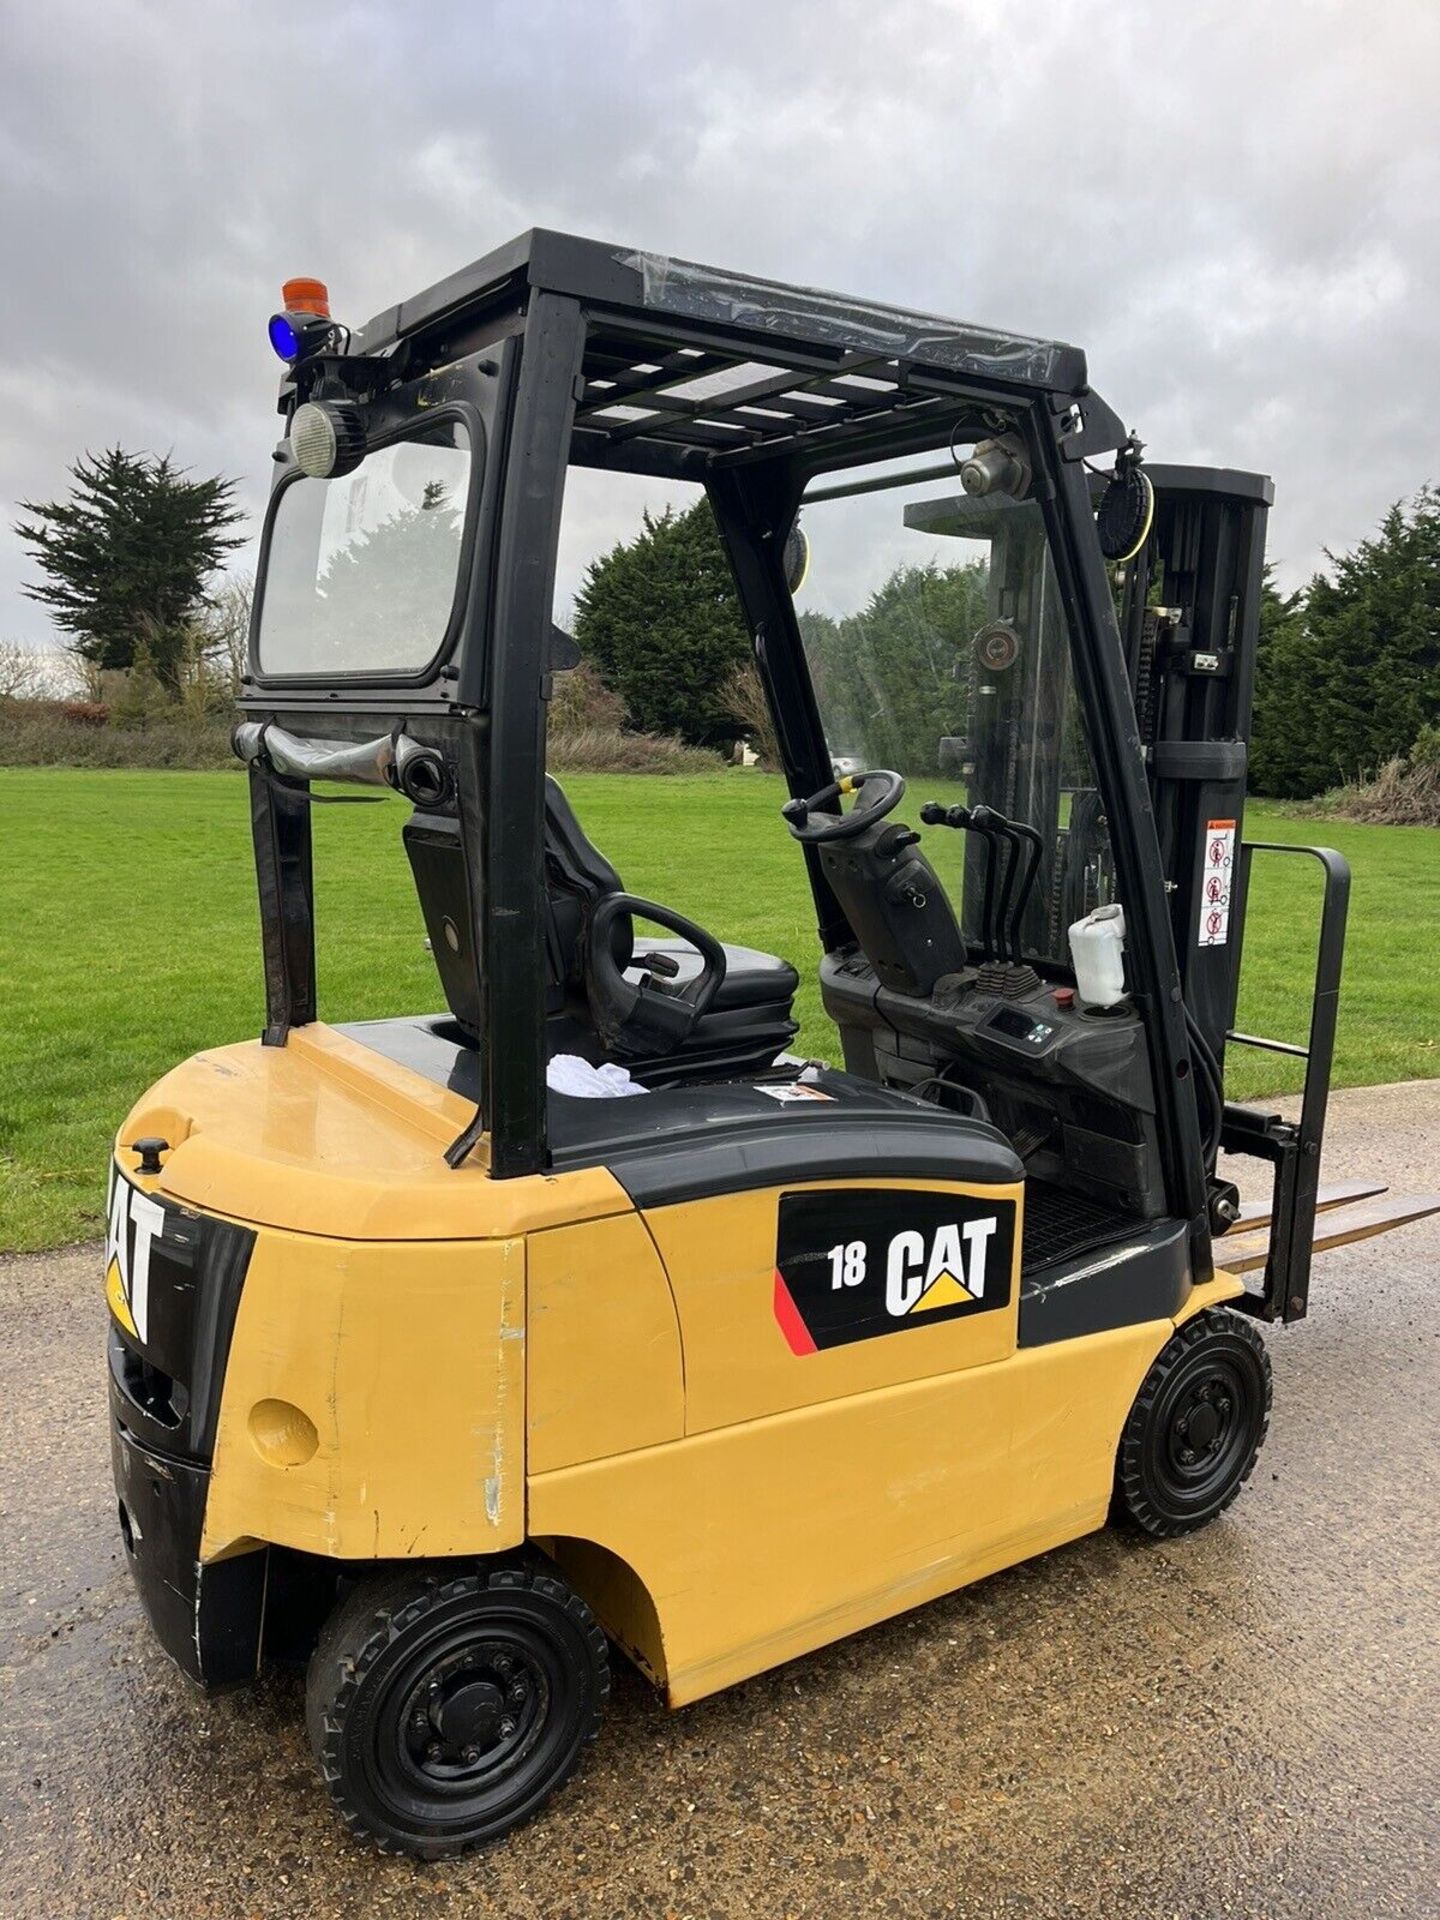 2012, CATERPILLAR 1.8 Electric Forklift Truck (Container Spec) - Image 2 of 7